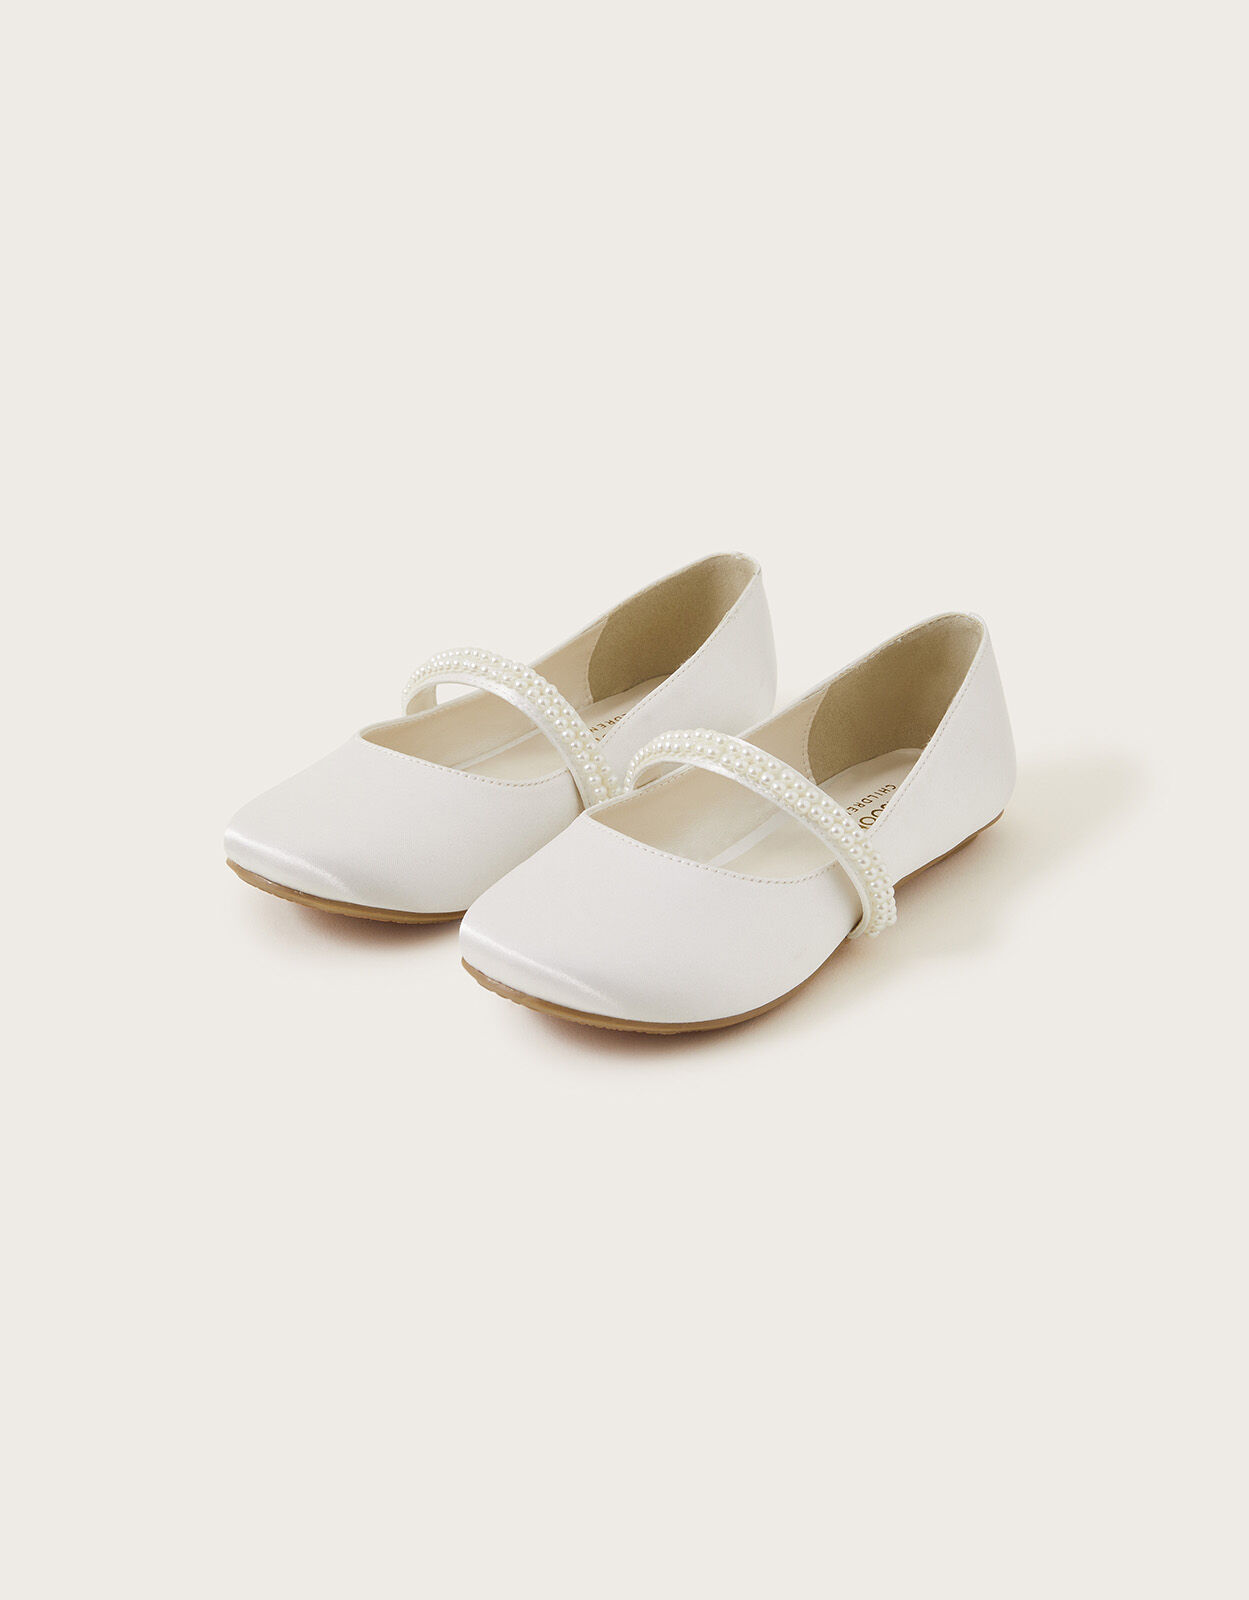 Tulleen floral-strap ballerina shoes - White